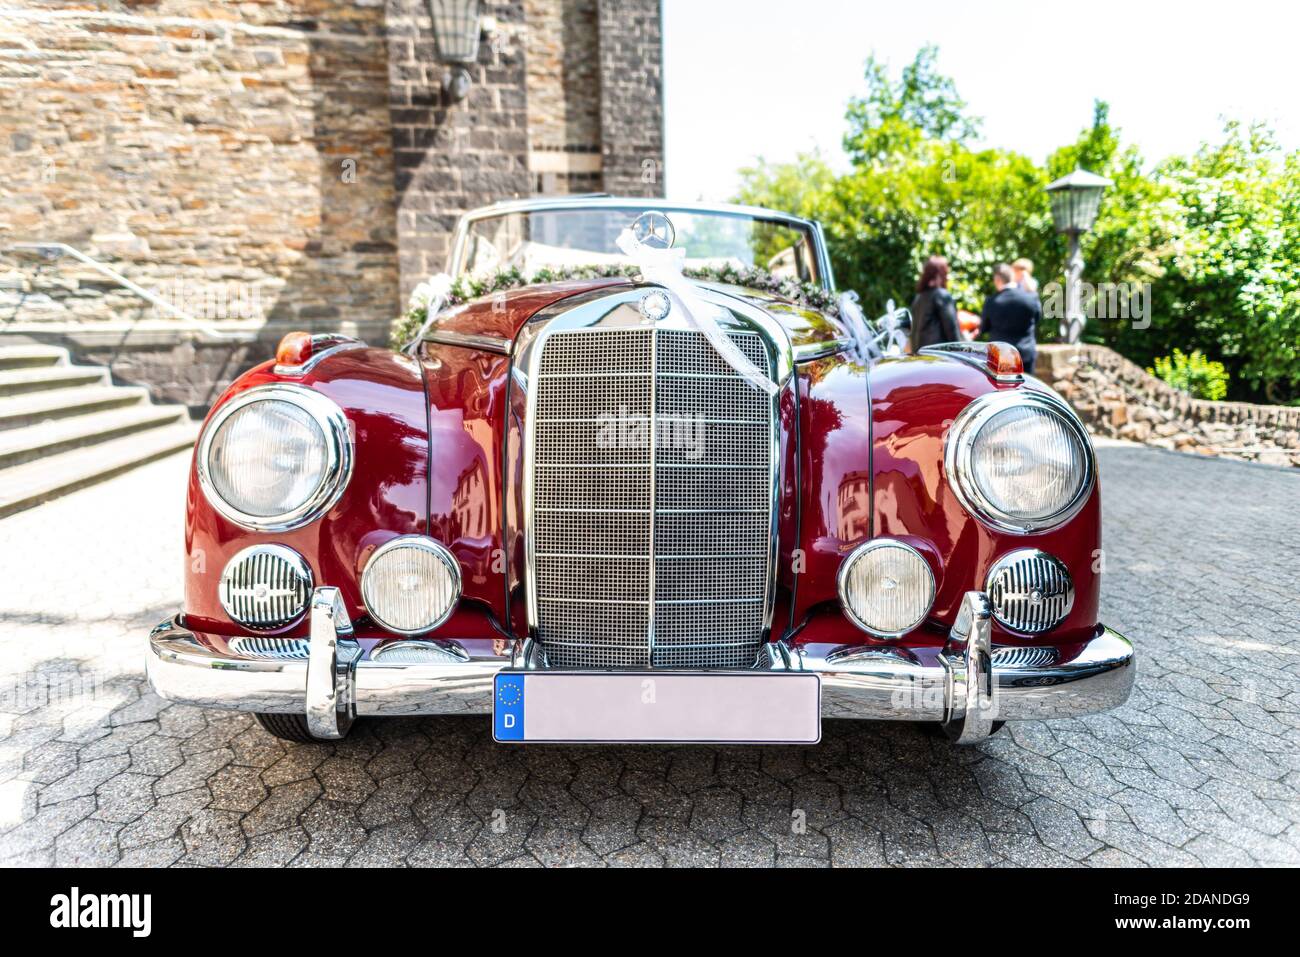 Ochtendung Germany 25.05.2019 Mercedes-Benz Typ 300 Adenauer W186 Cabriolet luxury executive classic German 1950s car decorated for a wedding with flo Stock Photo